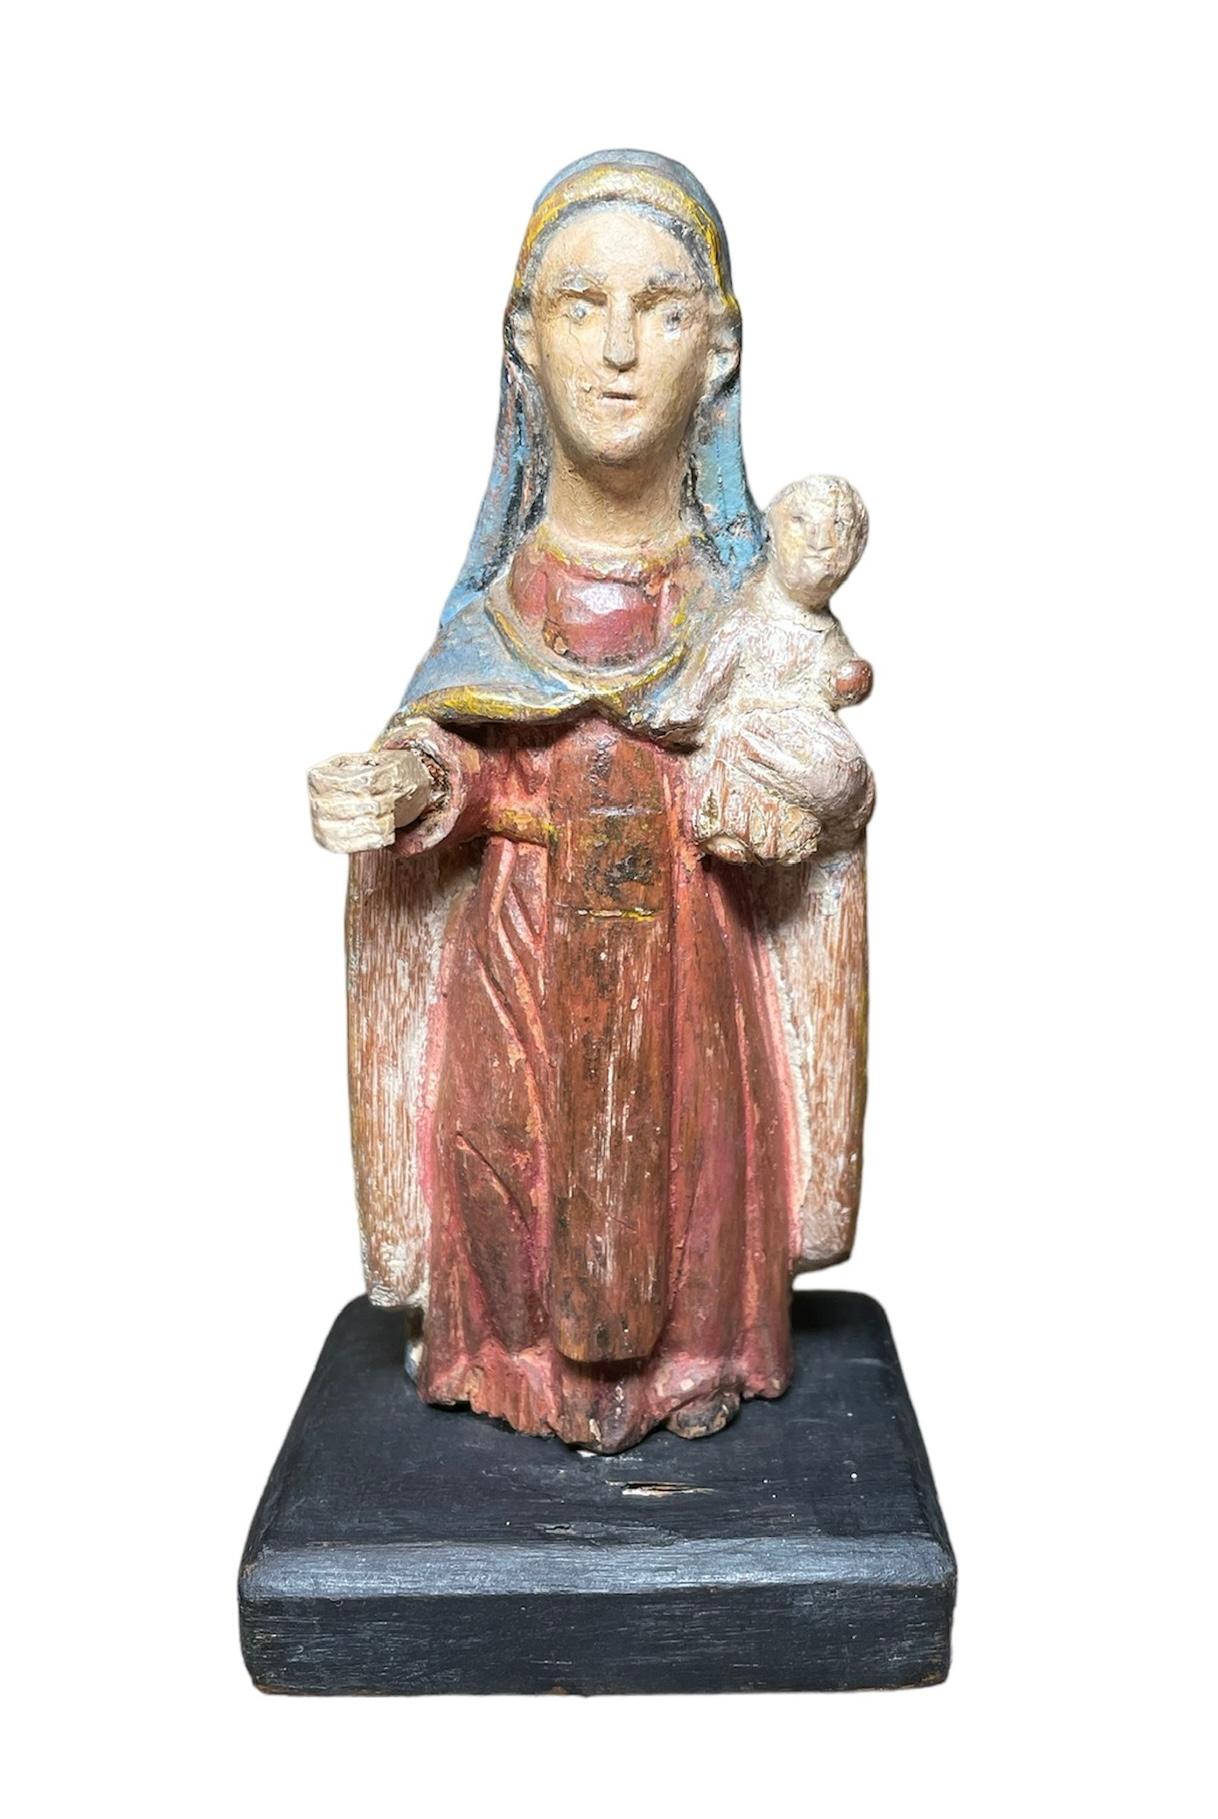 Hand-Carved Puerto Rican Santos de Palos/Our Lady of Mount Carmel Wood Carved Sculpture 